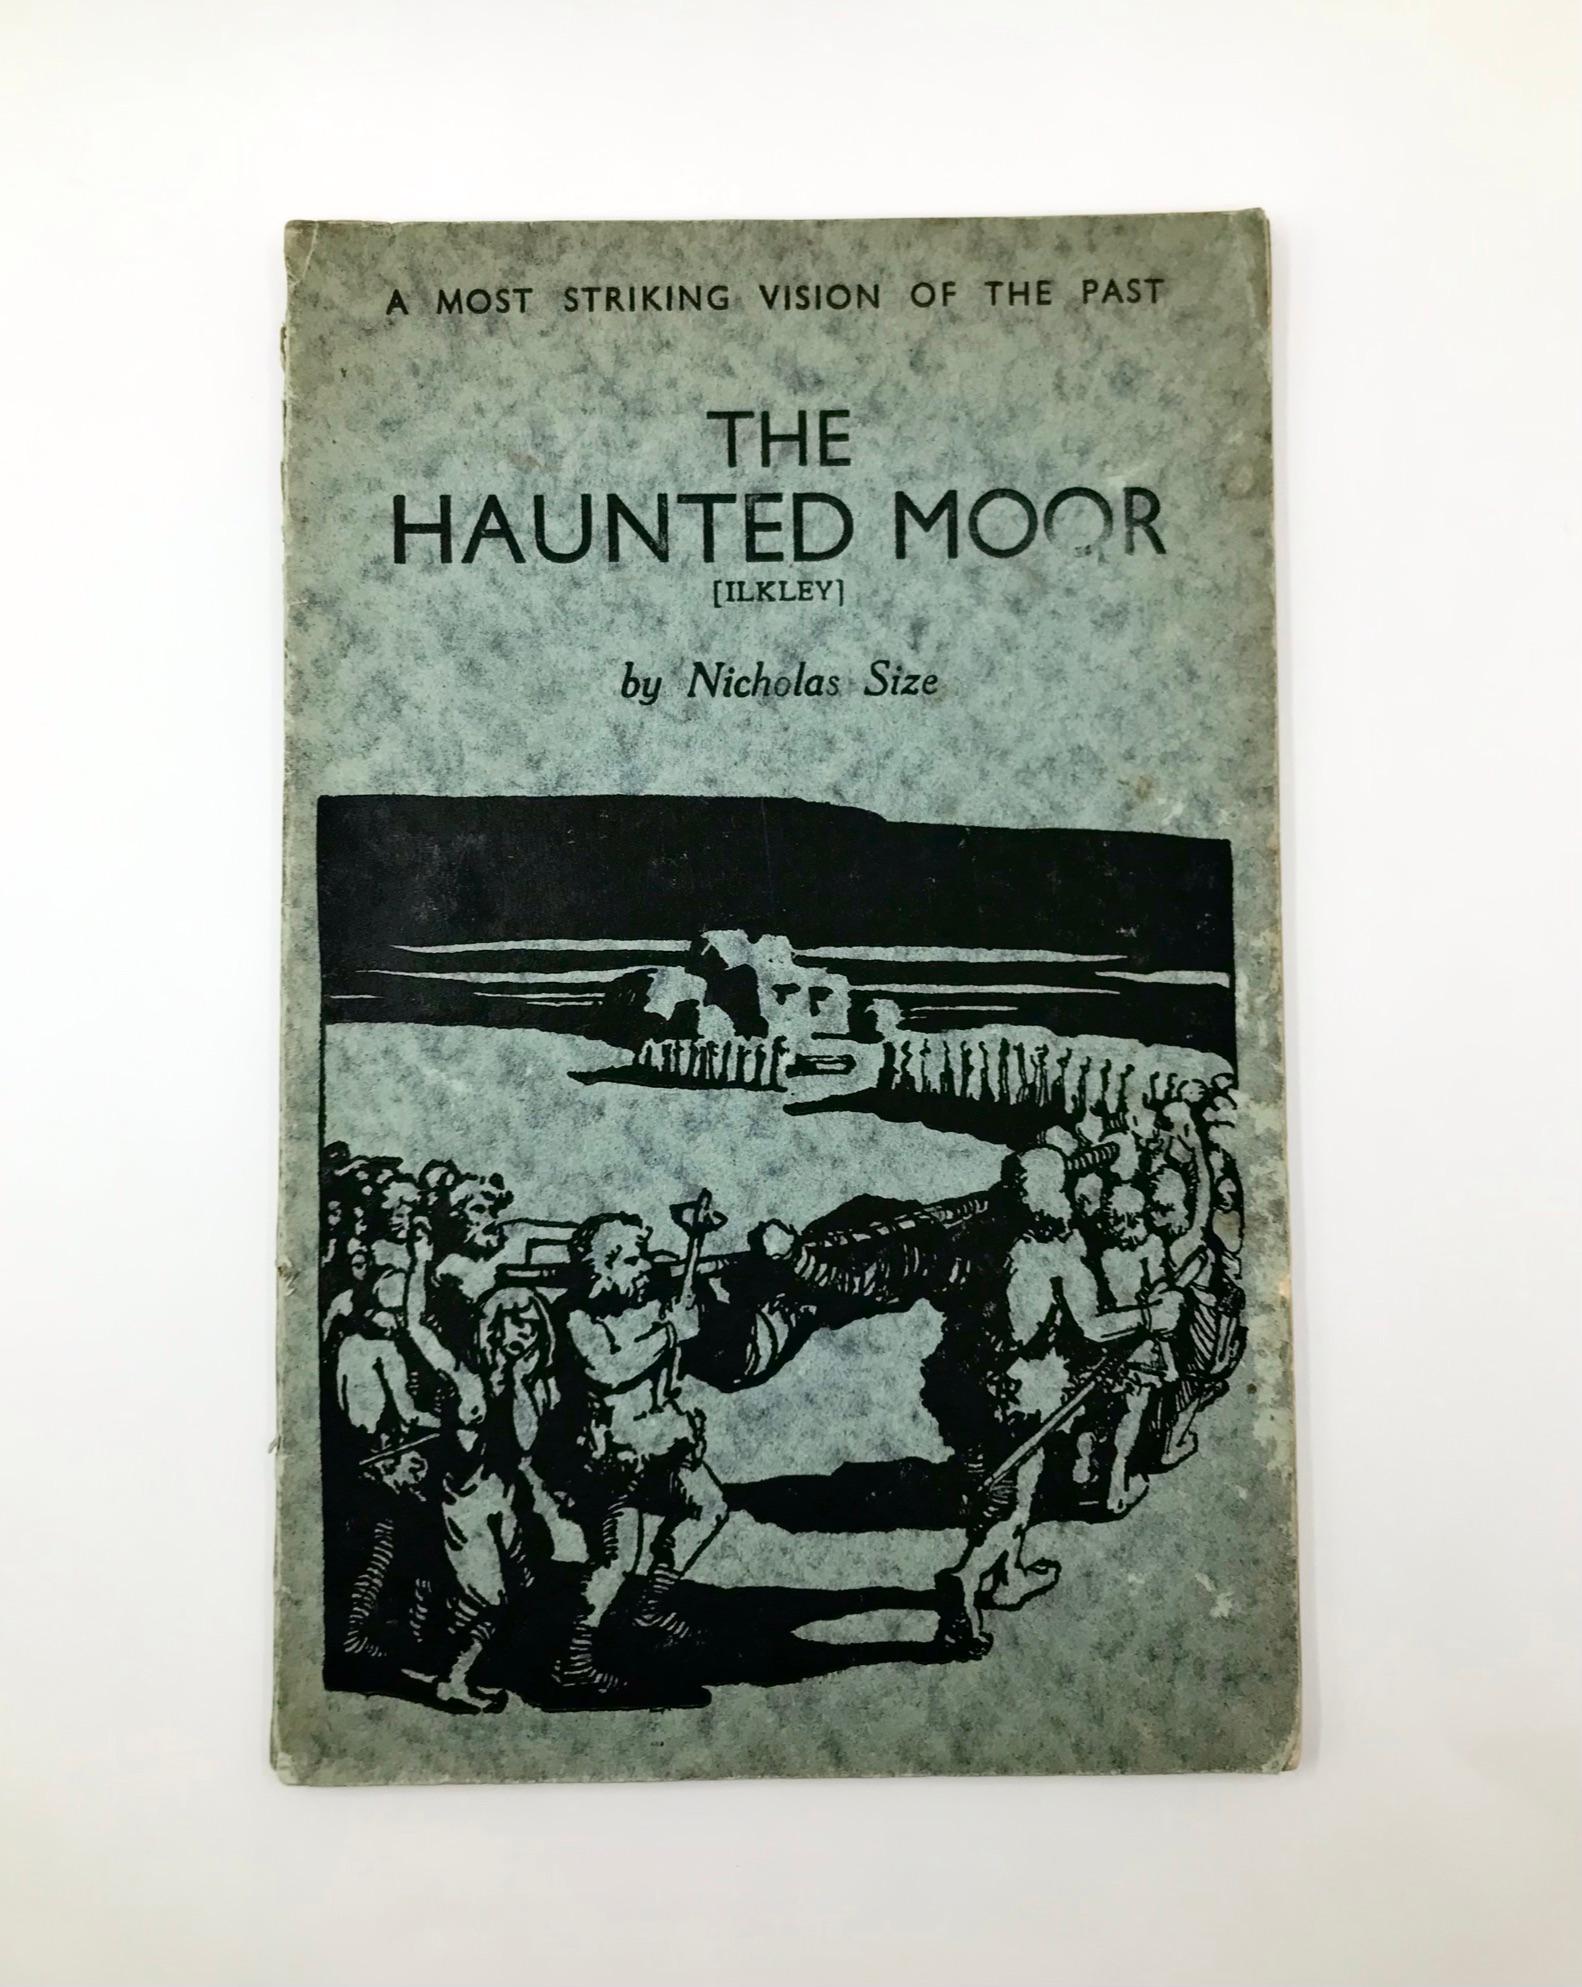 The Haunted Moor (Ilkley) by Nicholas Size